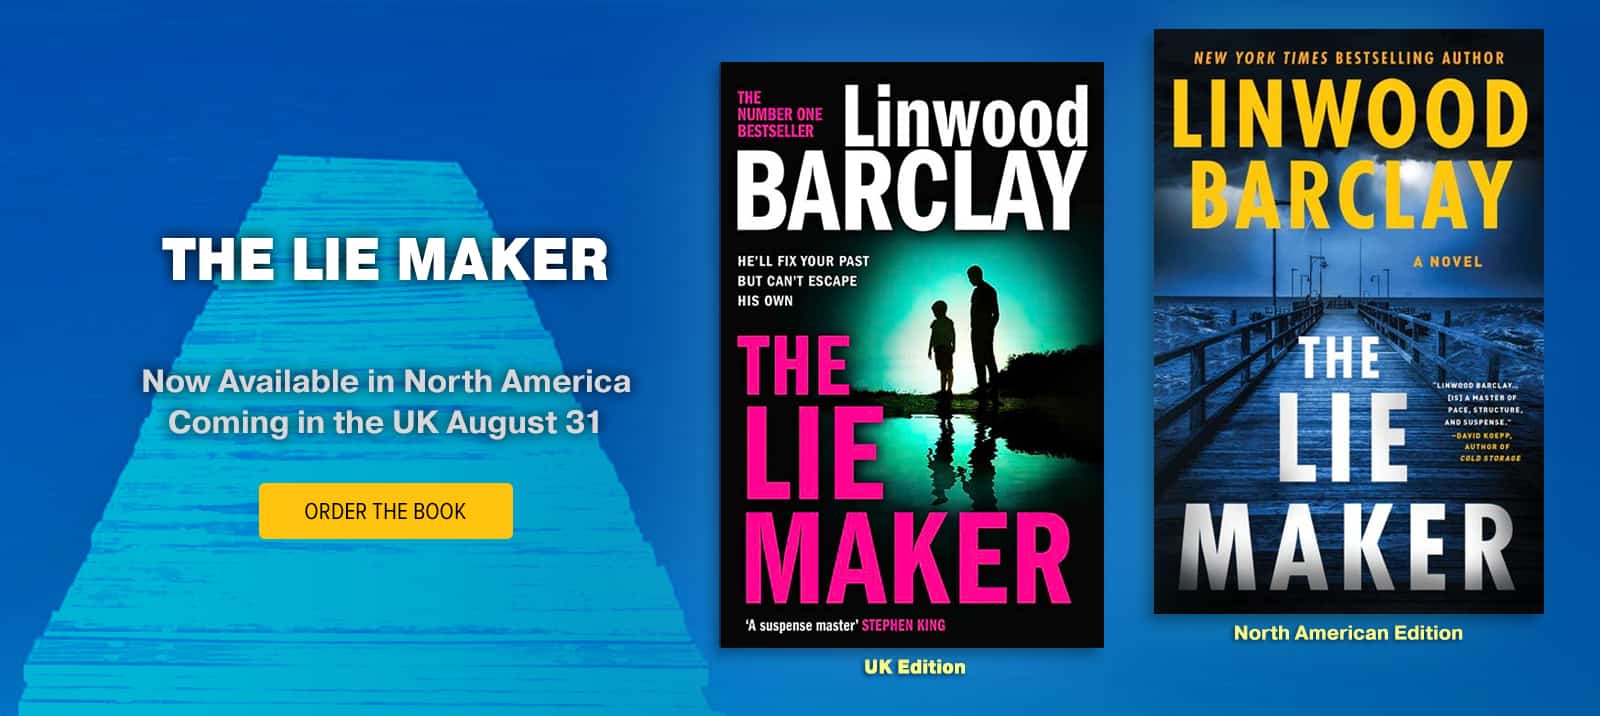 Linwood Barclay Official Website of the International Bestselling Author